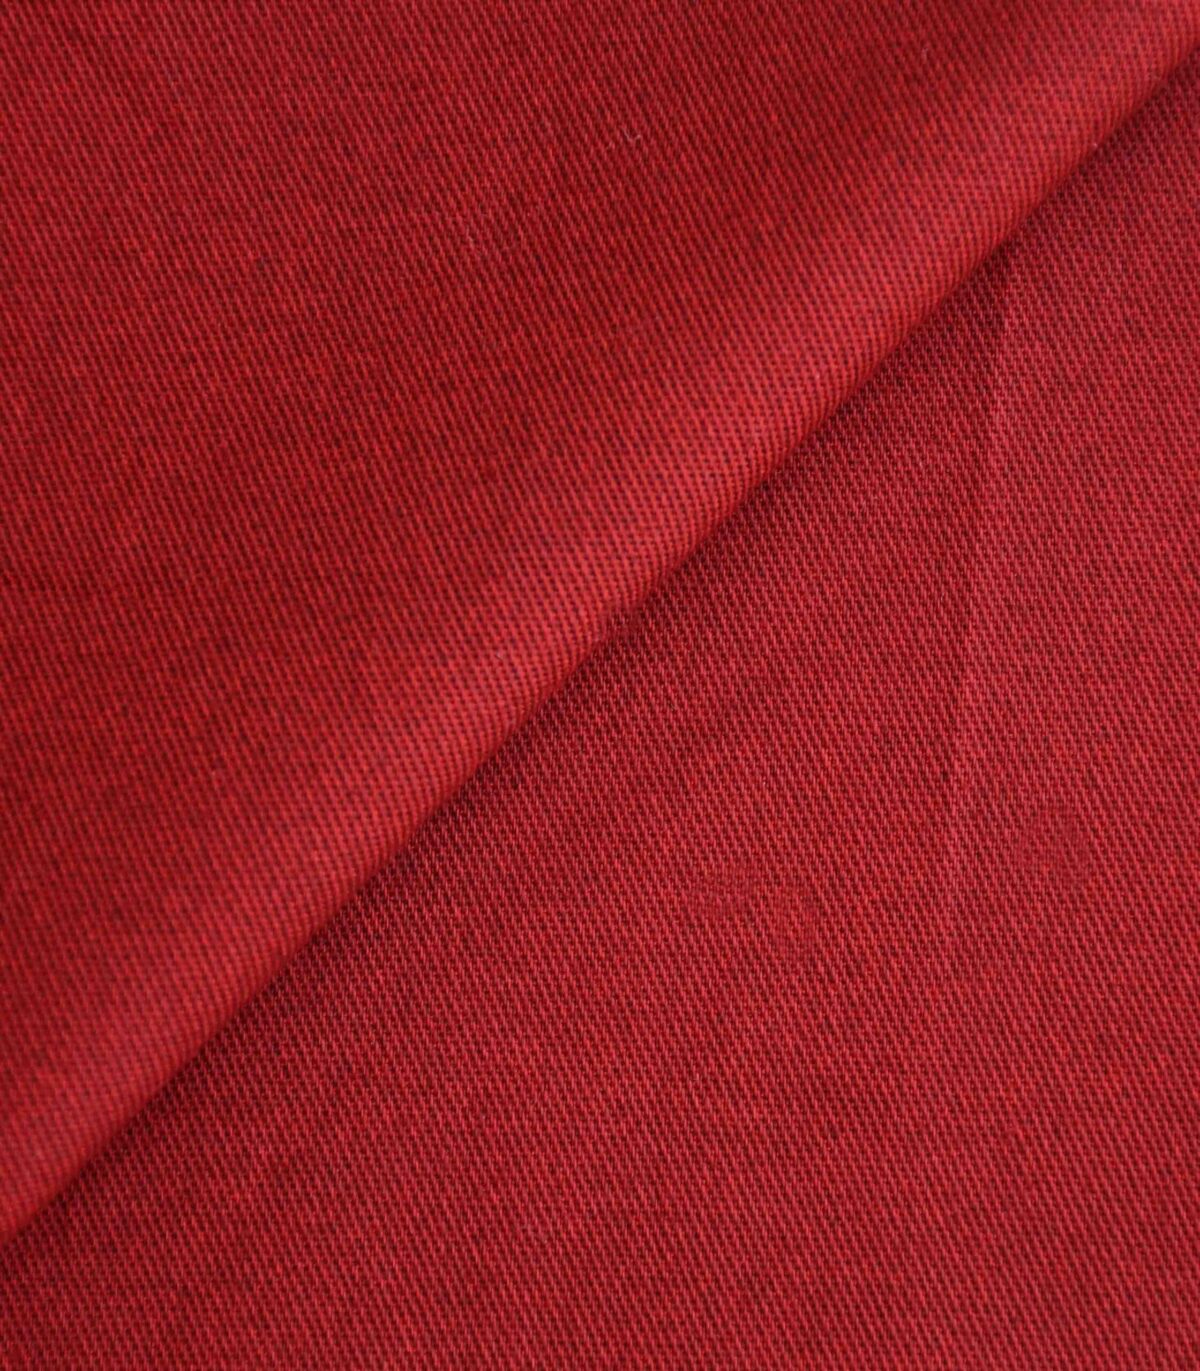 Cotton Lycra Maroon Dyed Woven Fabric